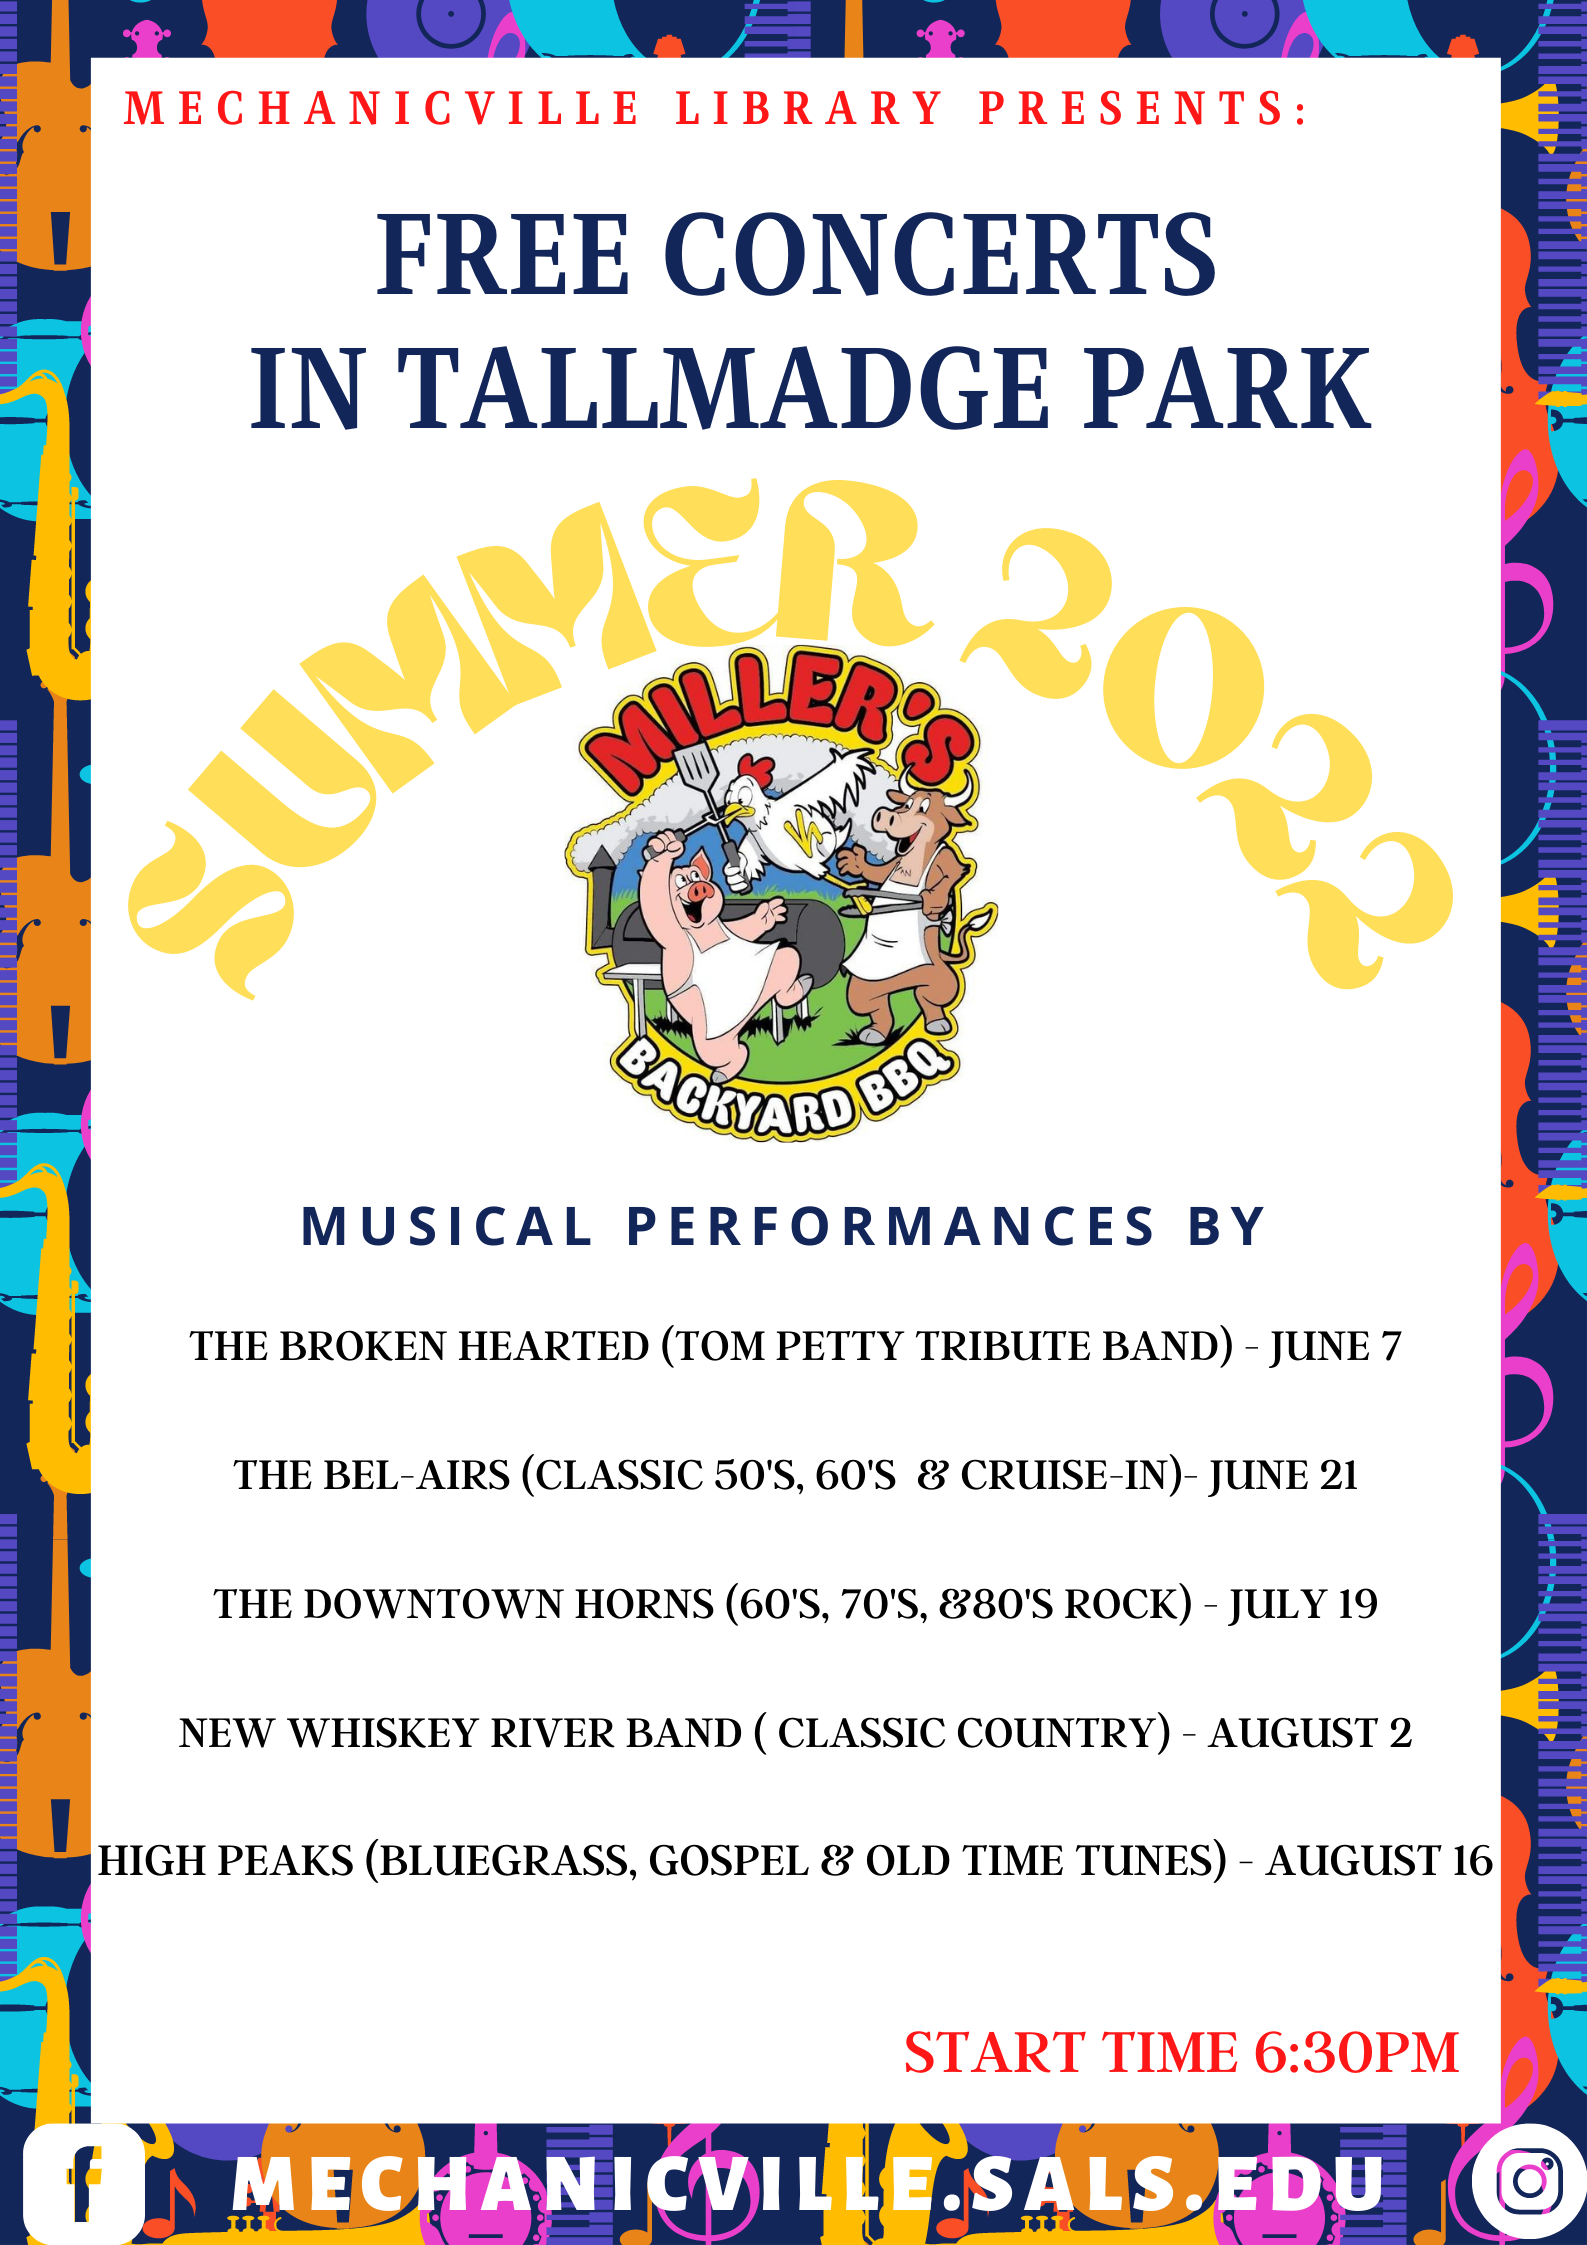 Free Concert in Tallmadge- The Downtown Horns @ Tallmadge Park | Mechanicville | New York | United States